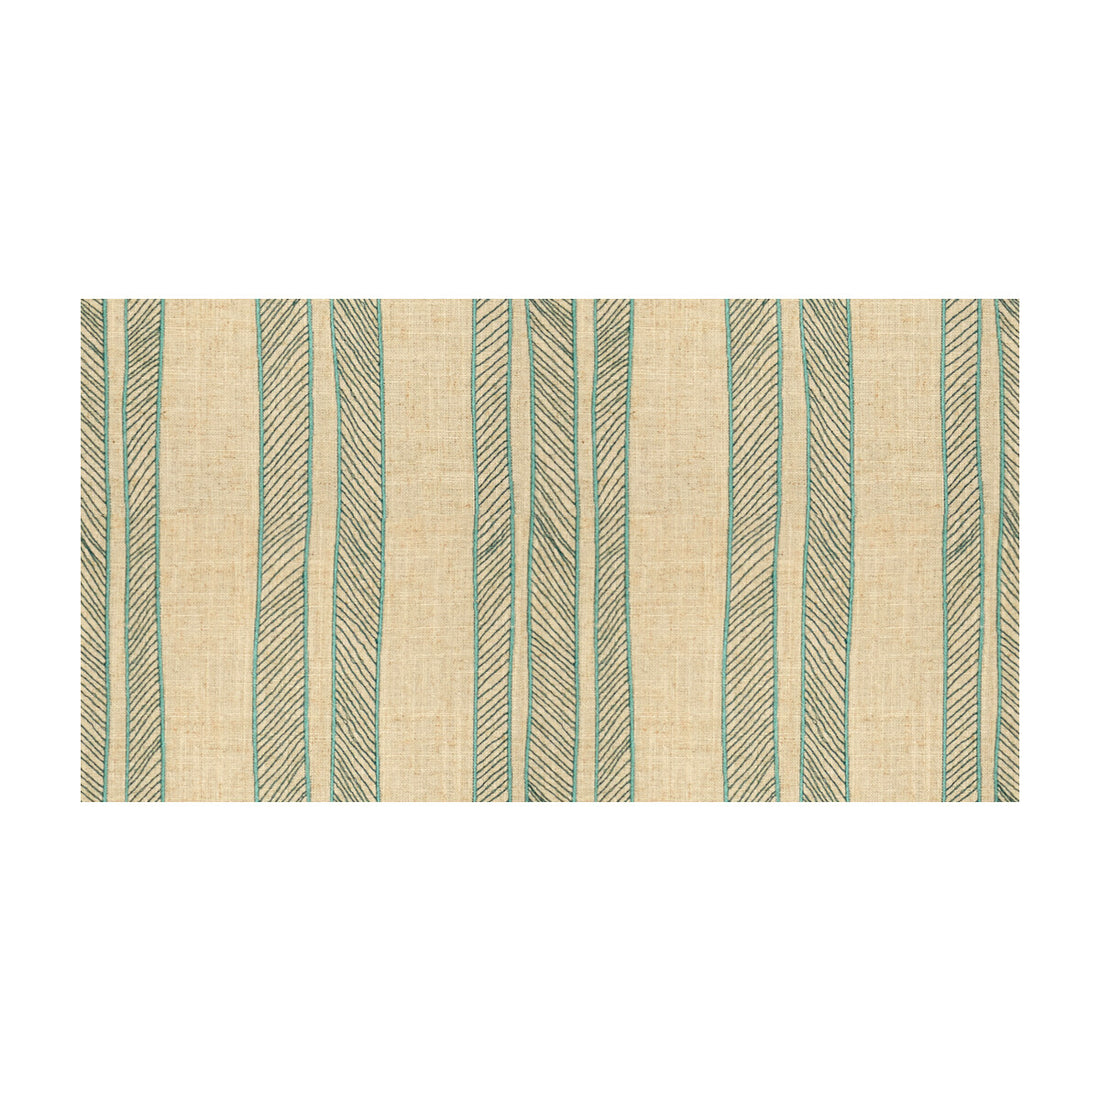 Cords fabric in aqua color - pattern 33430.13.0 - by Kravet Basics in the Jeffrey Alan Marks Waterside collection